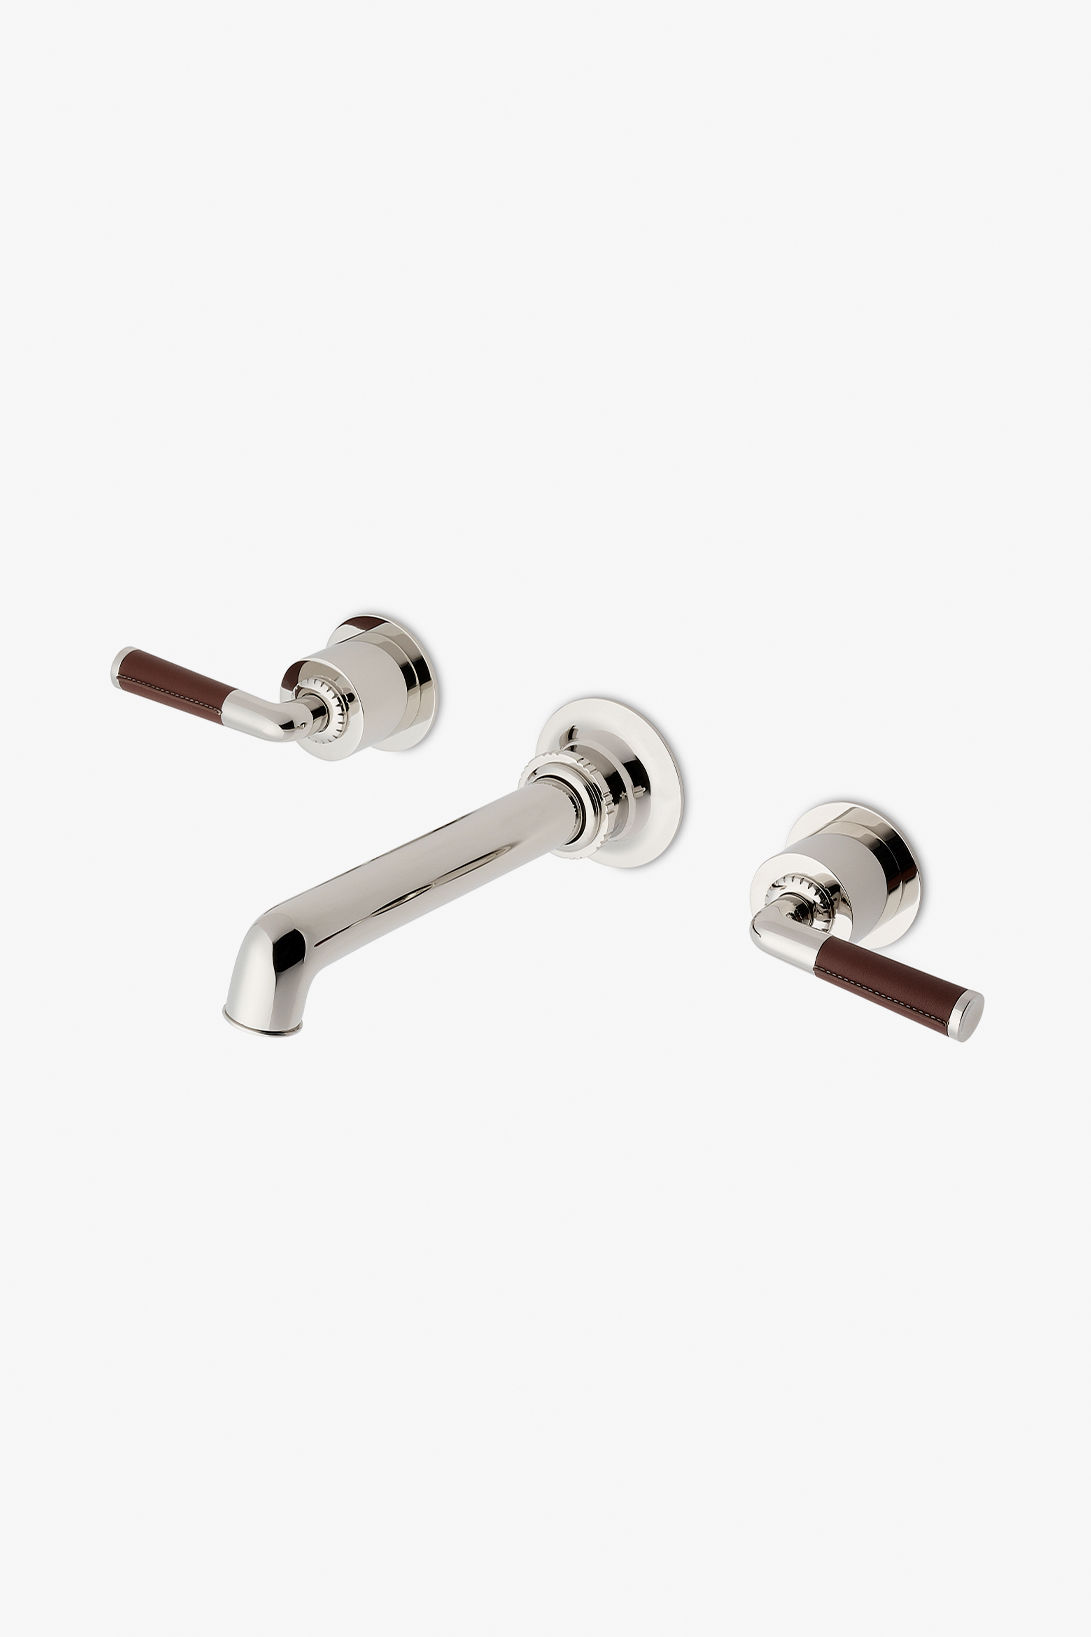 Henry Chronos Wall Mounted Faucet Leather